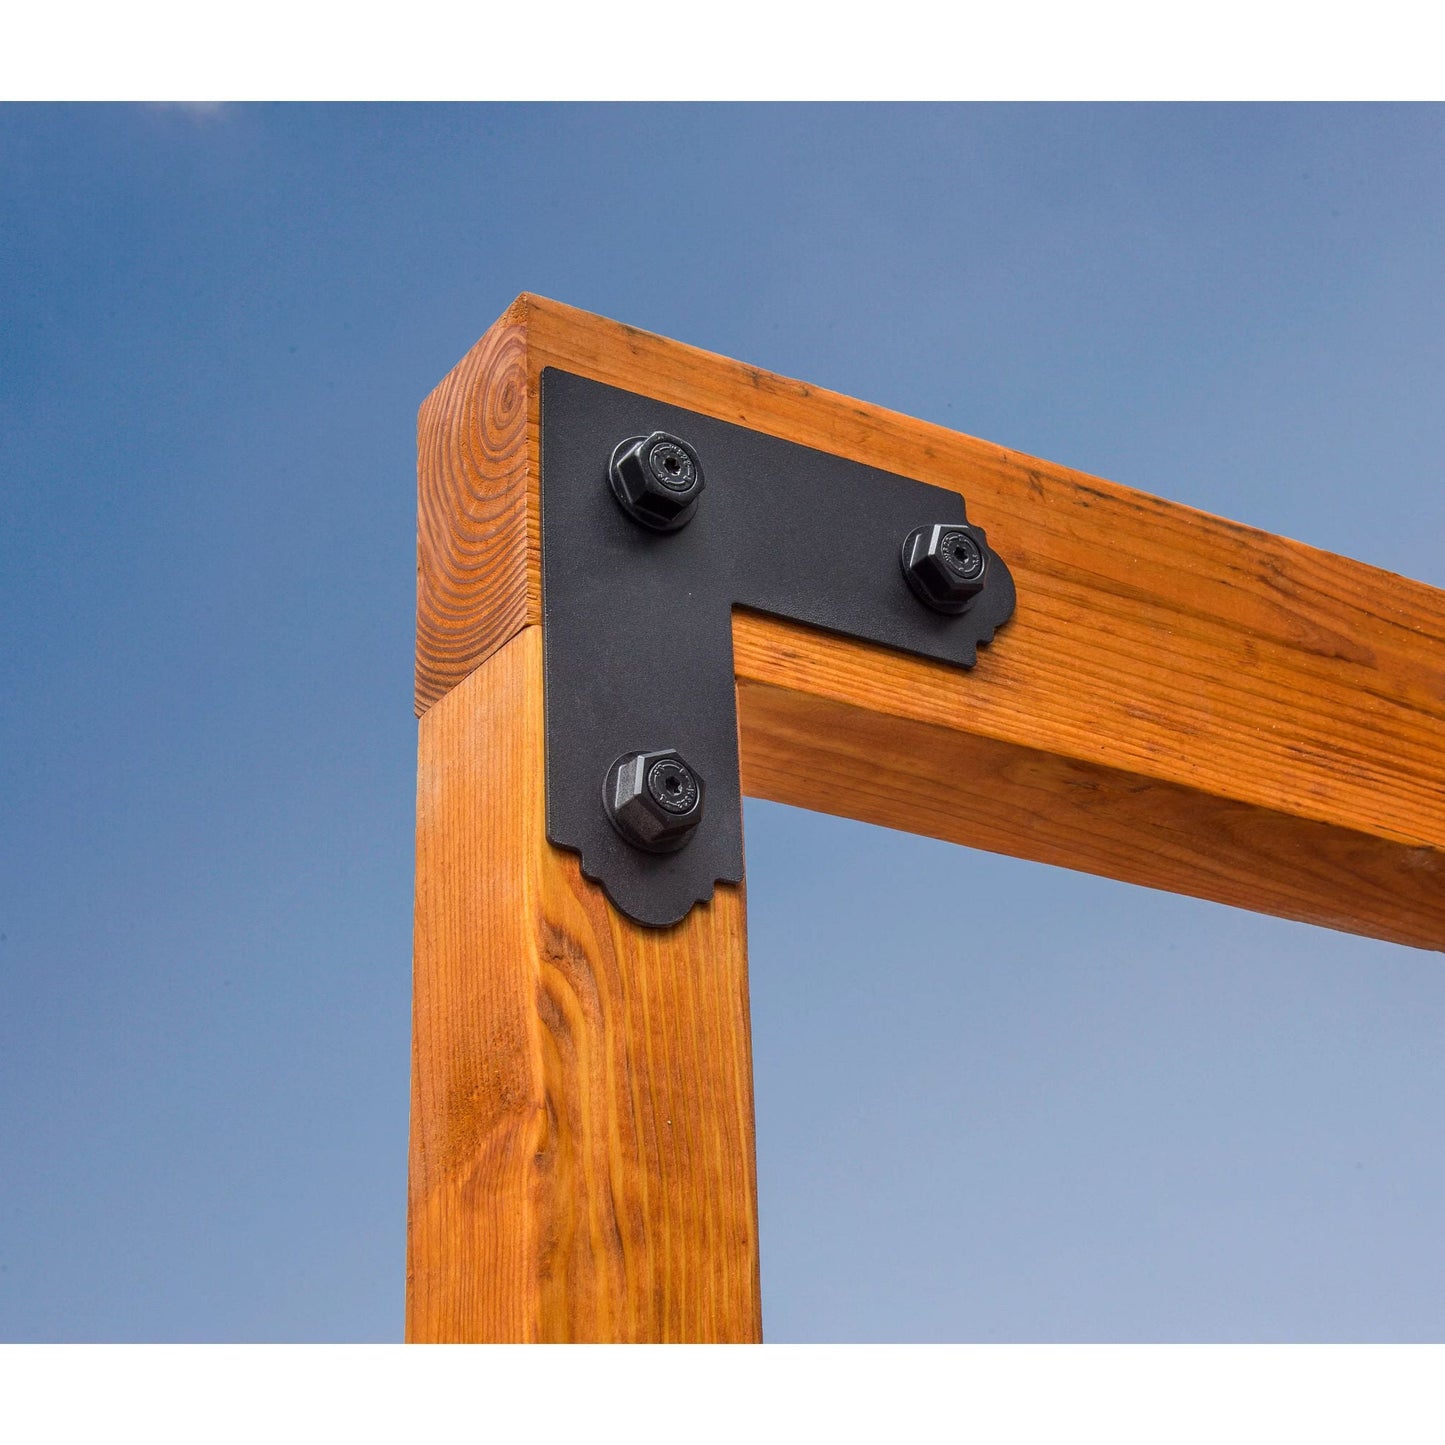 Simpson Black APL4 Outdoor Accents With Required Hardware